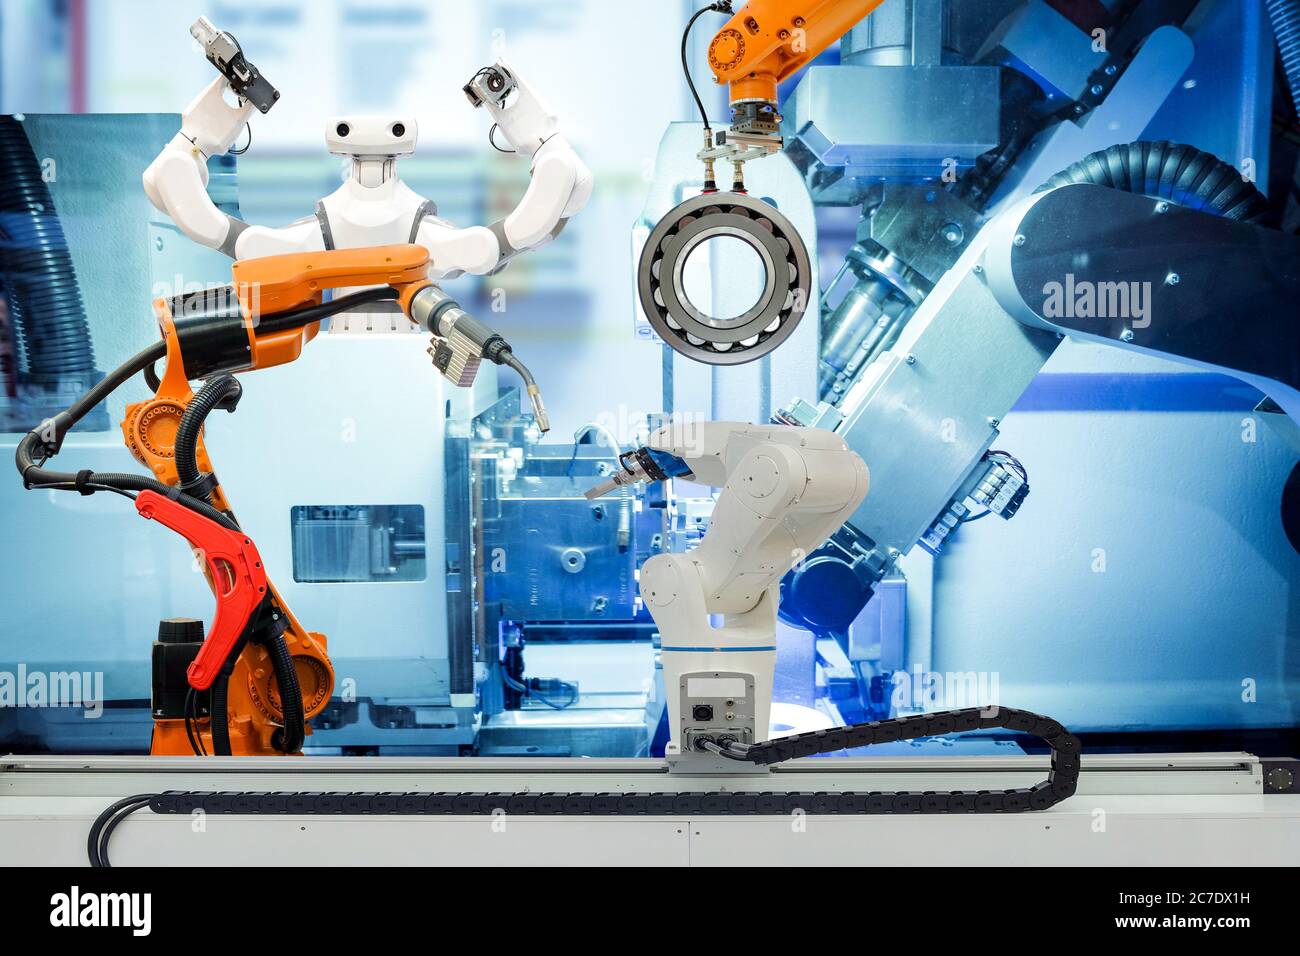 Industrial robotic working with metal part on smart factory, on machine blue tone color background, industry 4.0 and technology concept Stock Photo